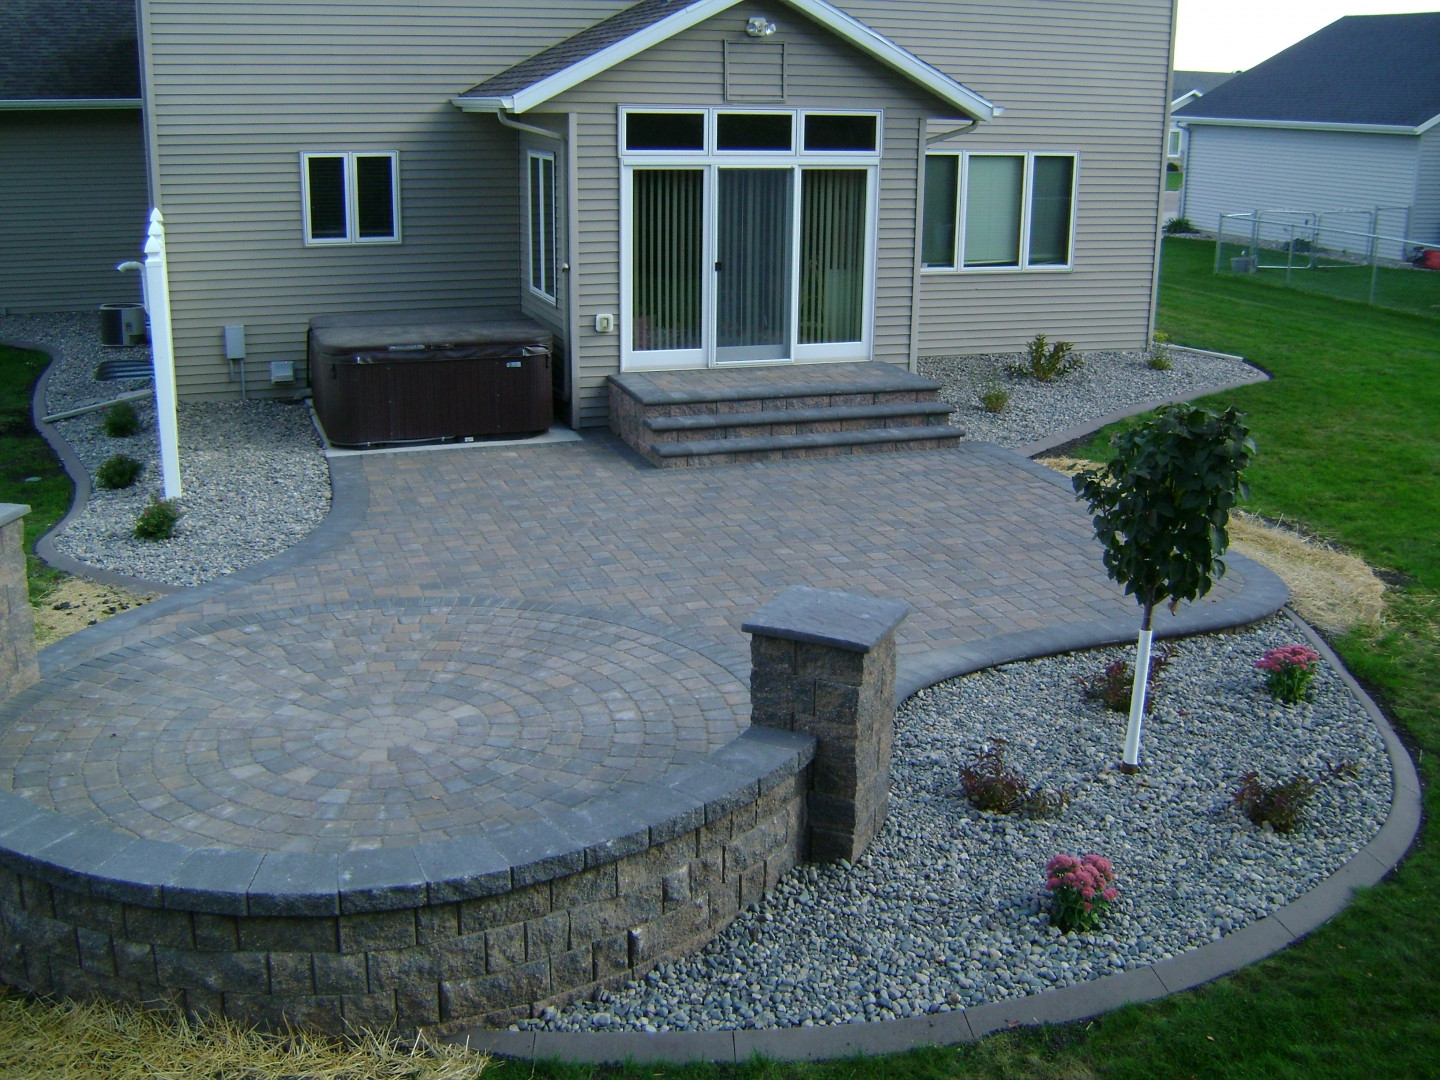 Landscaping Around Patio
 Earth Tone Paver Patio with Sitting Wall and Rock Fill